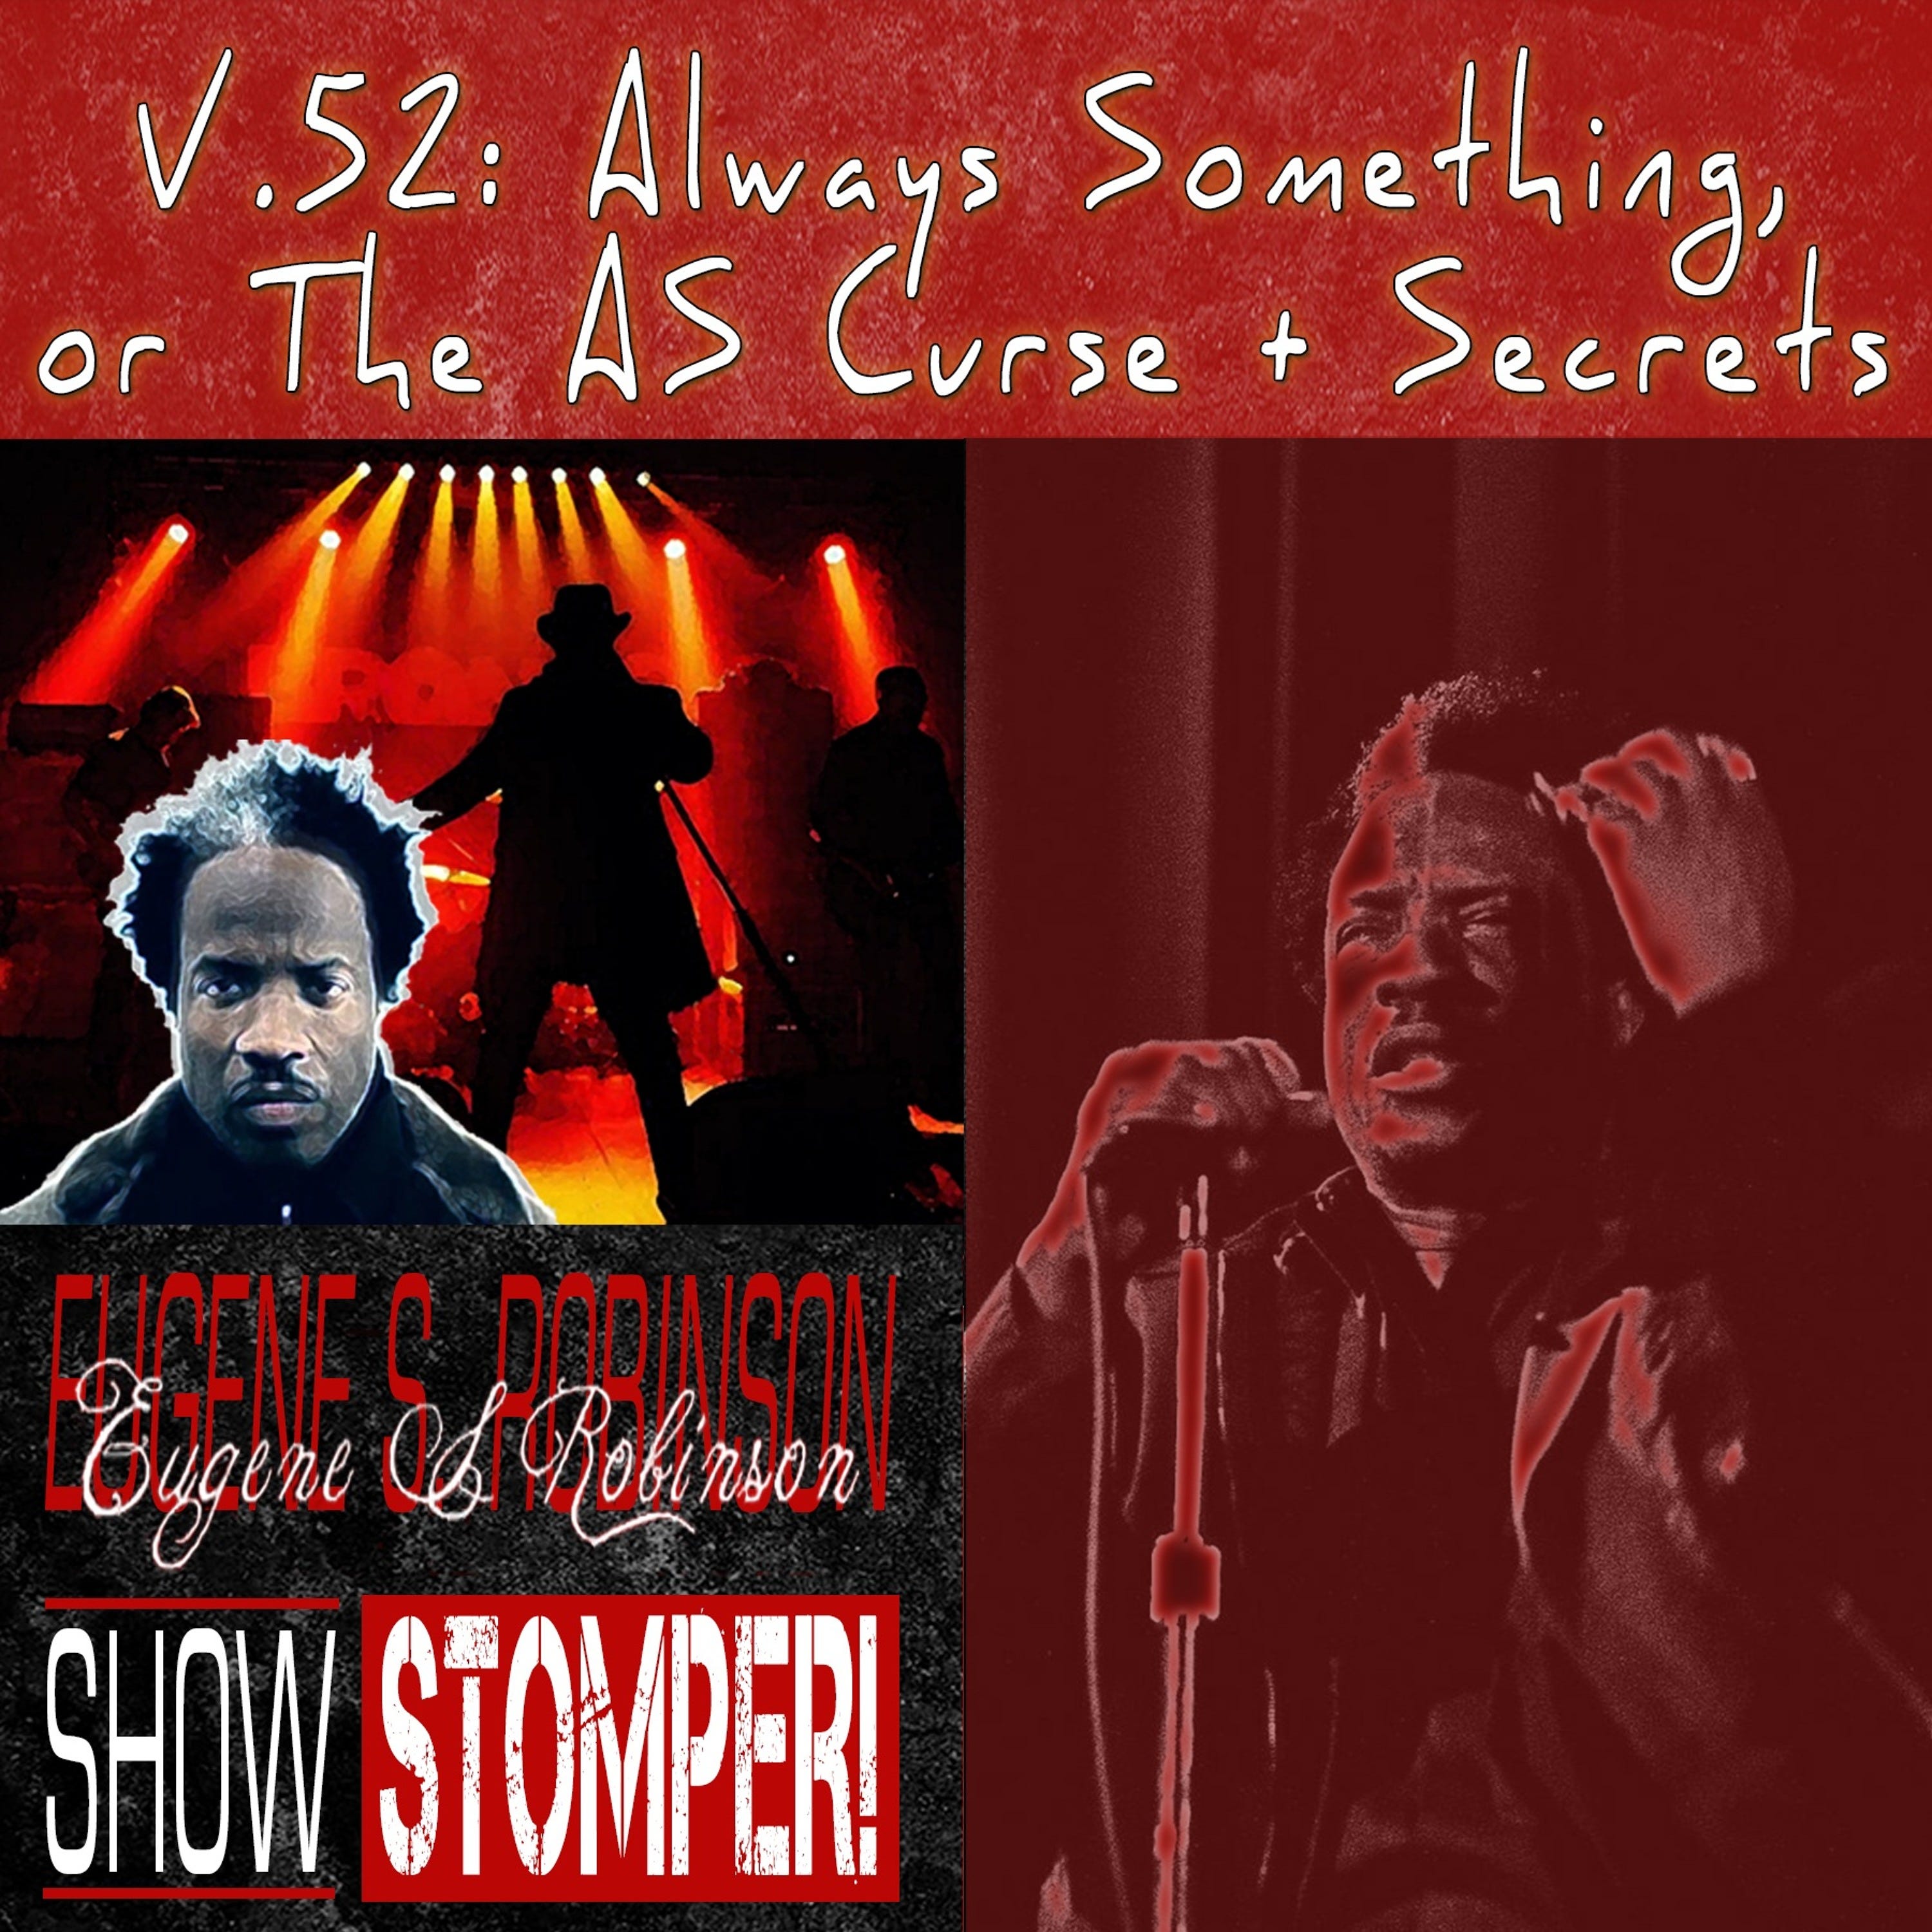 V.52 Always Something Or The AS Curse + Secrets On The Eugene S. Robinson Show Stomper